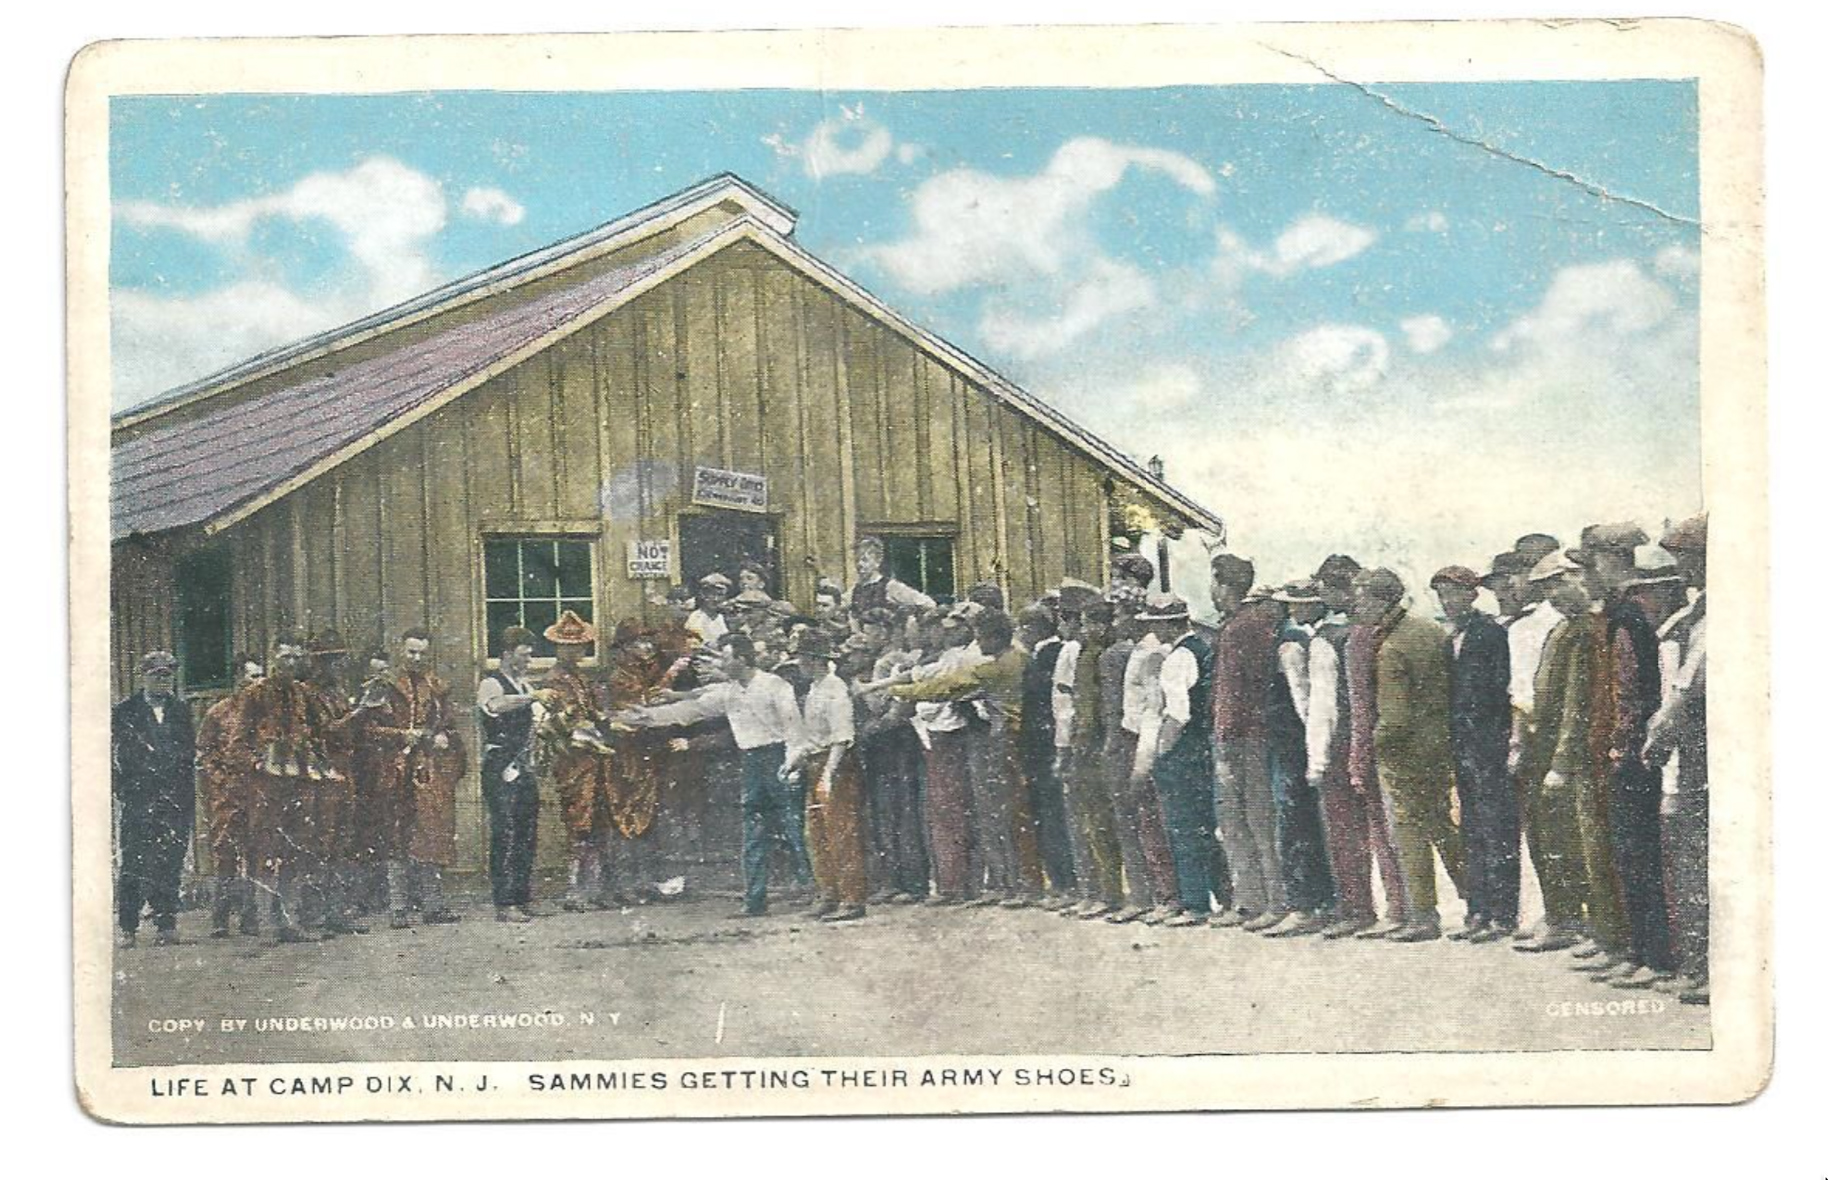 Camp Dix - Recruits getting their army footware - around 1917-18